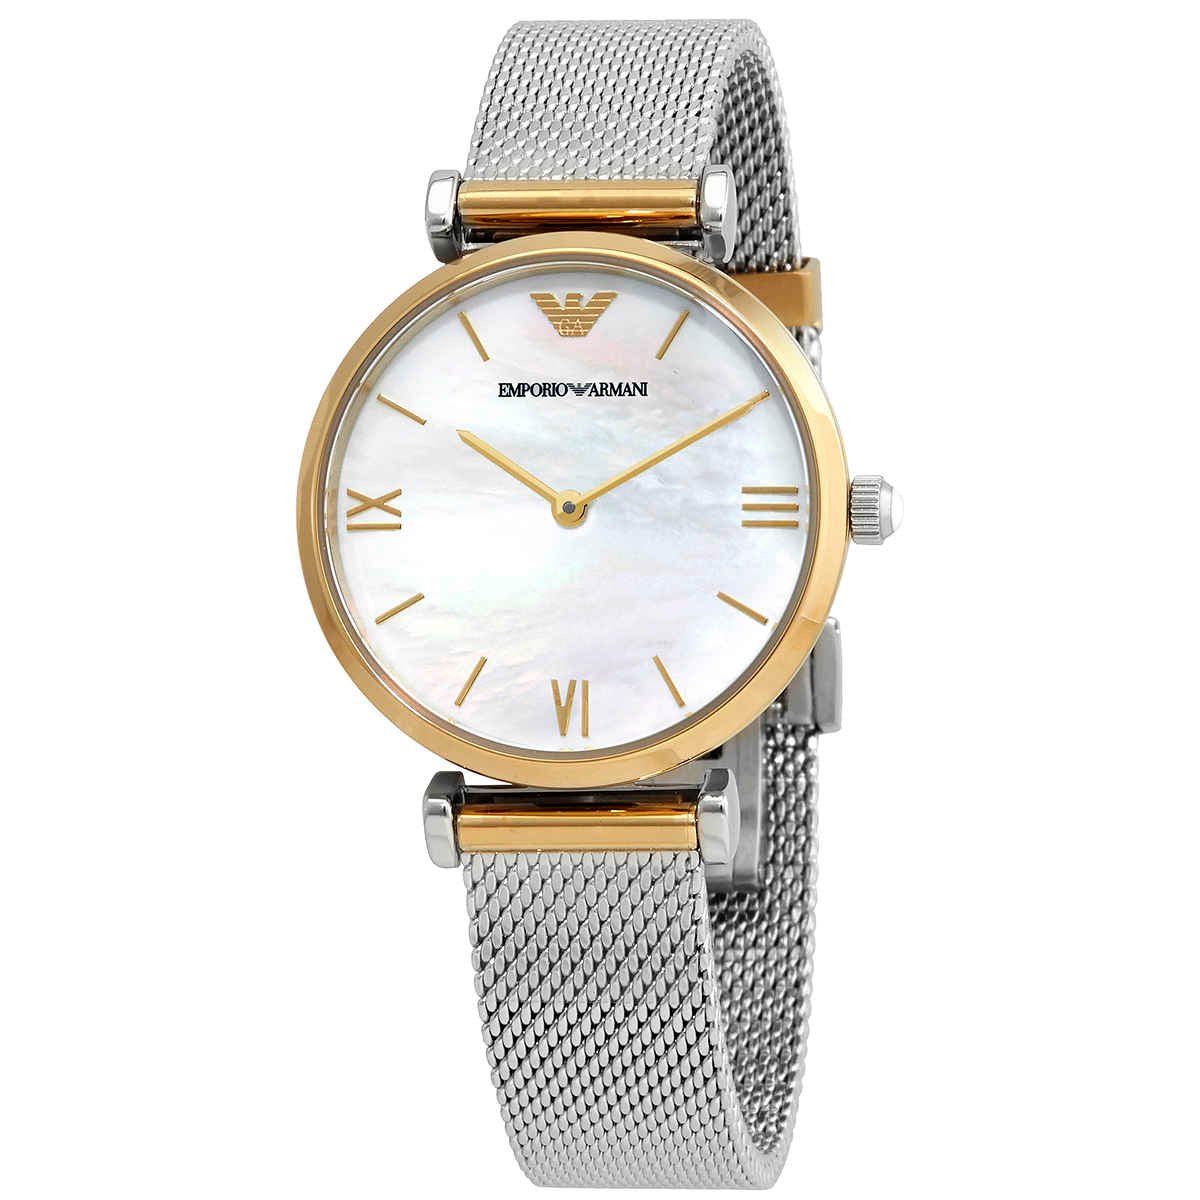 Emporio Armani Ladies Automatic Watch Gianni T-Bar Two-Tone AR2068 - Watches & Crystals